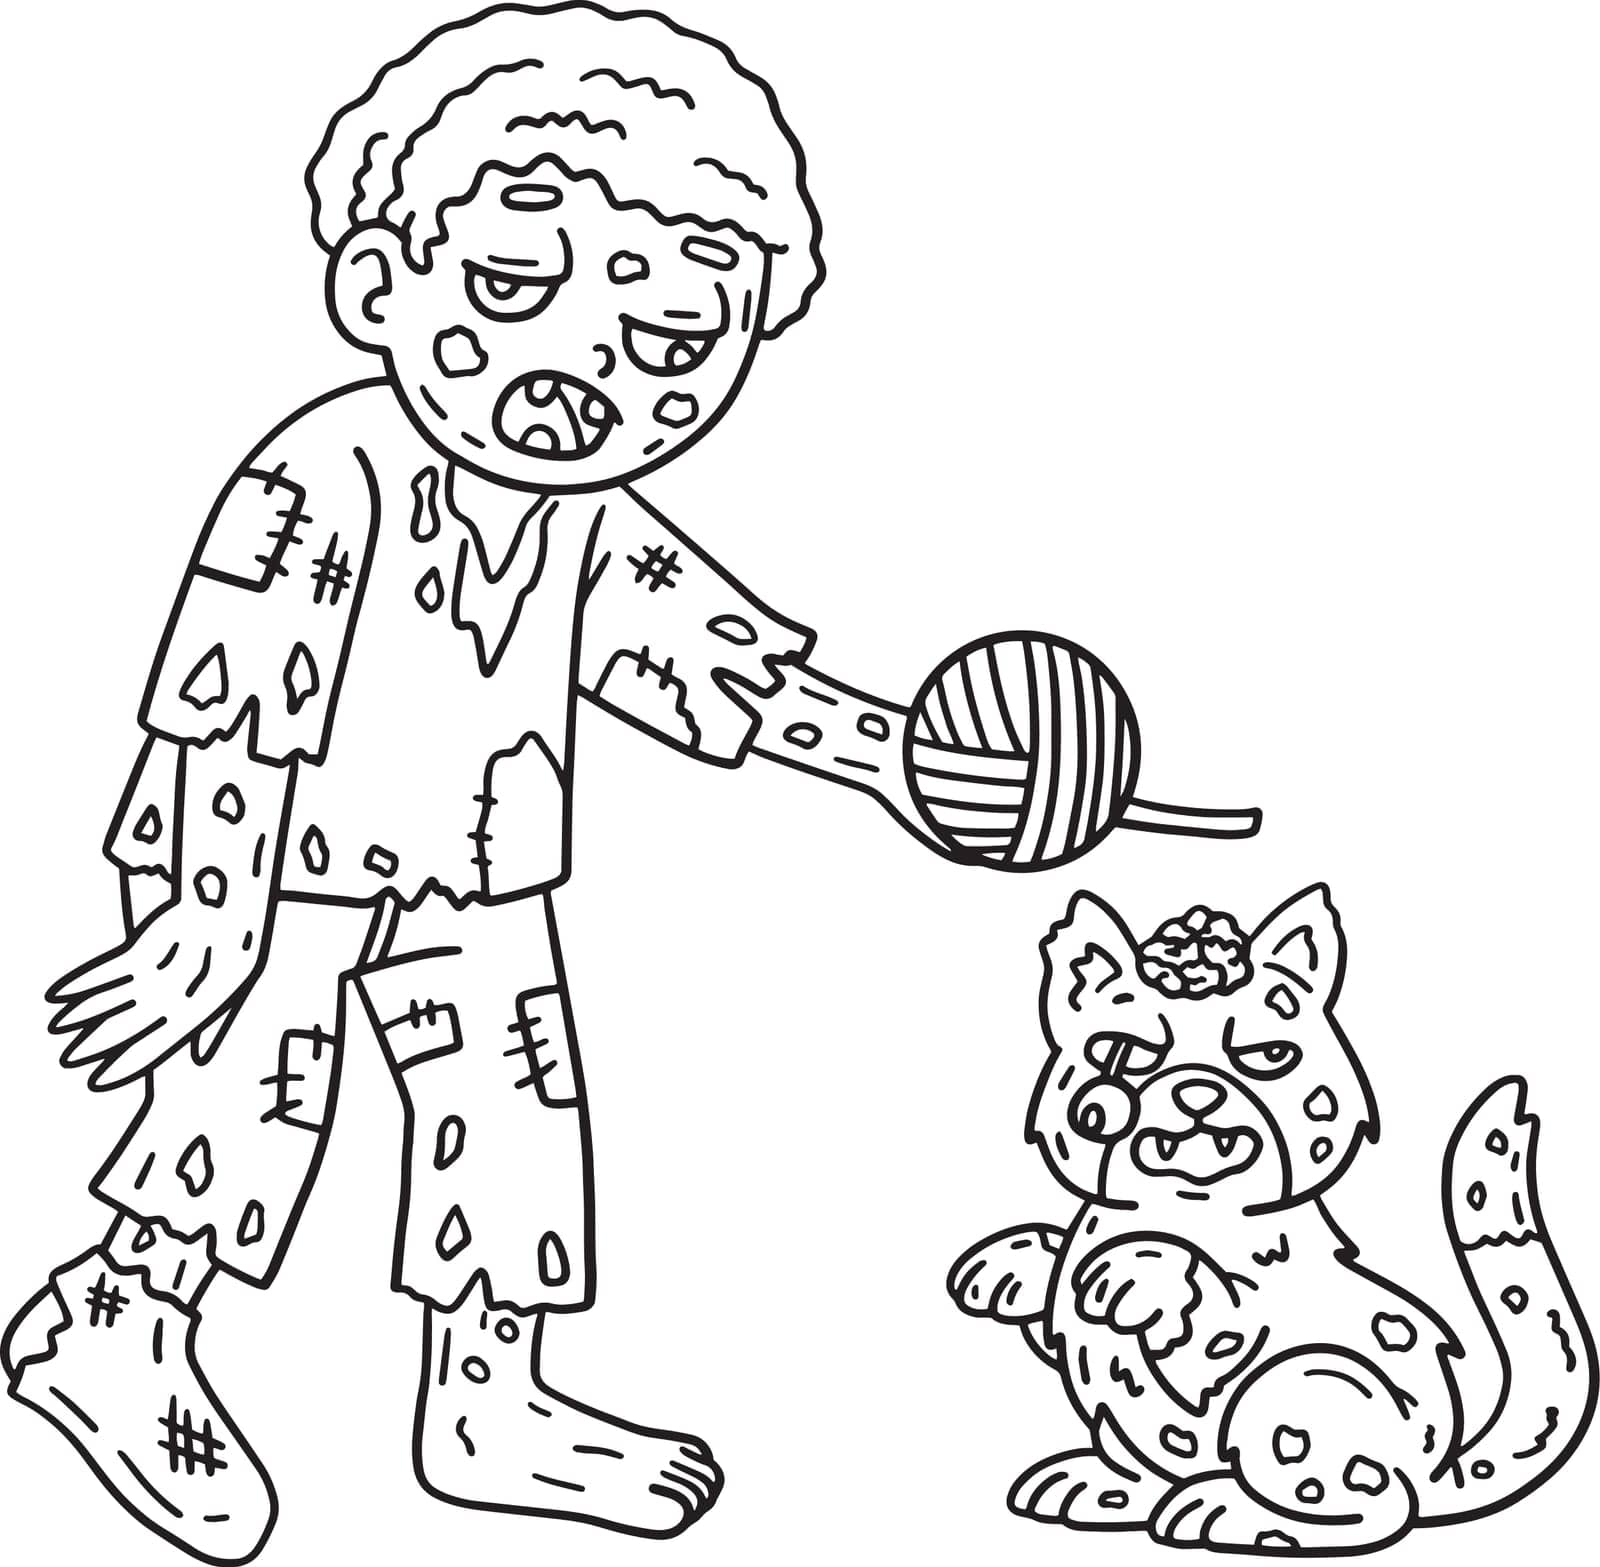 A cute and funny coloring page of a Zombie and Undead Cat. Provides hours of coloring fun for children. To color, this page is very easy. Suitable for little kids and toddlers.